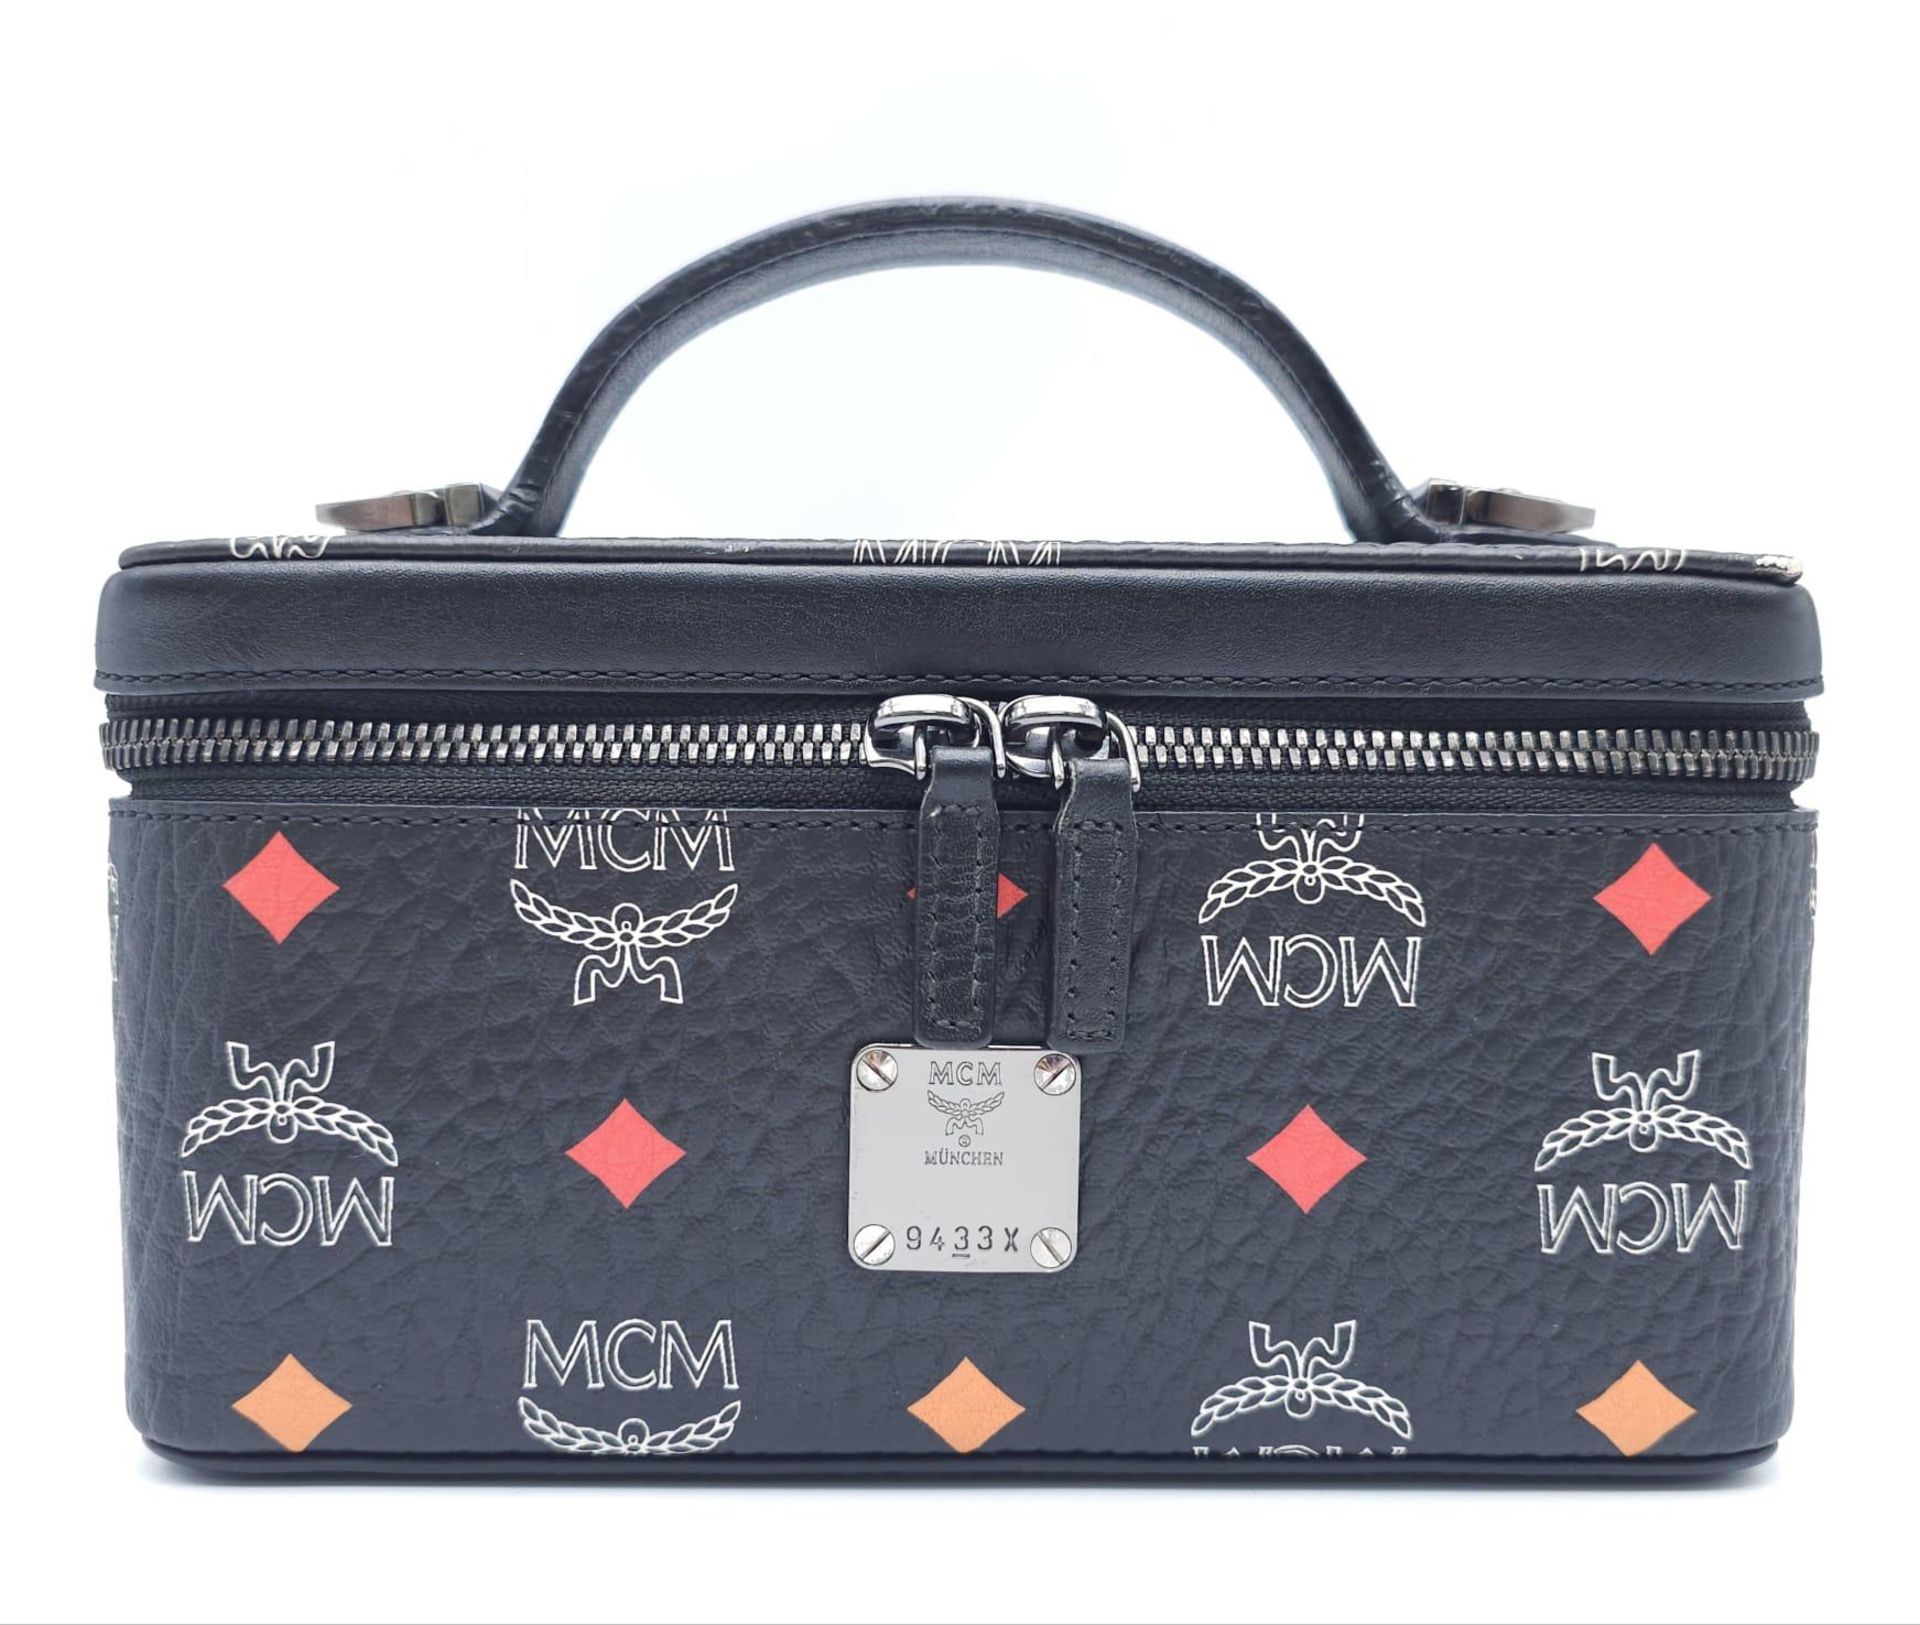 An MCM Rockstar Vanity Case Bag. Leather exterior with leather handle, detachable and adjustable